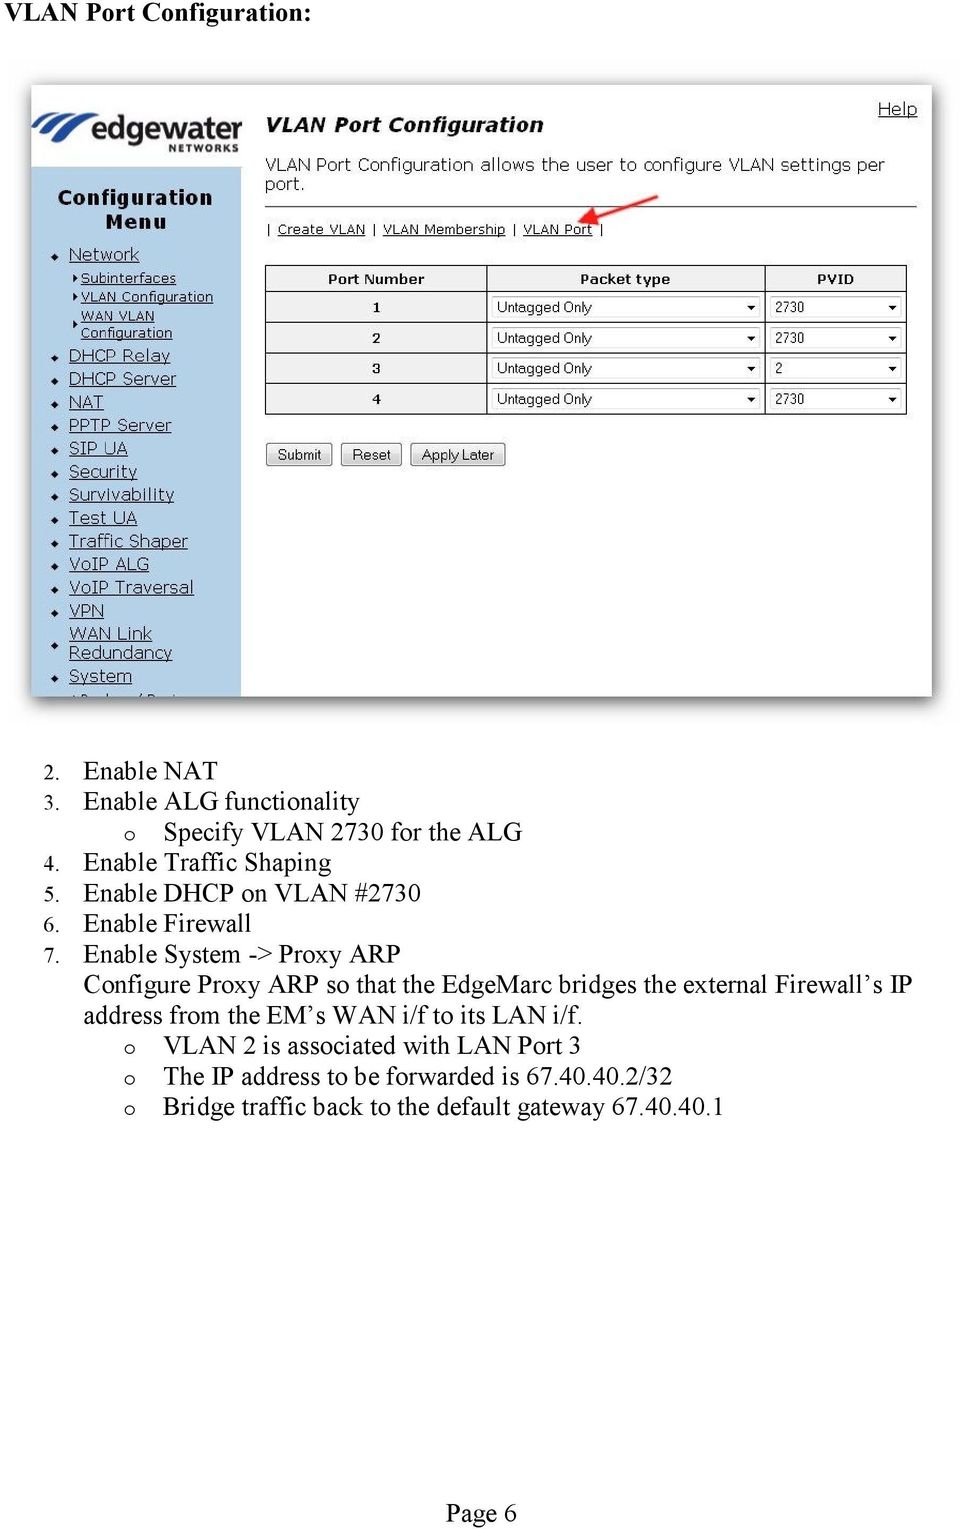 Enable System -> Proxy ARP Configure Proxy ARP so that the EdgeMarc bridges the external Firewall s IP address from